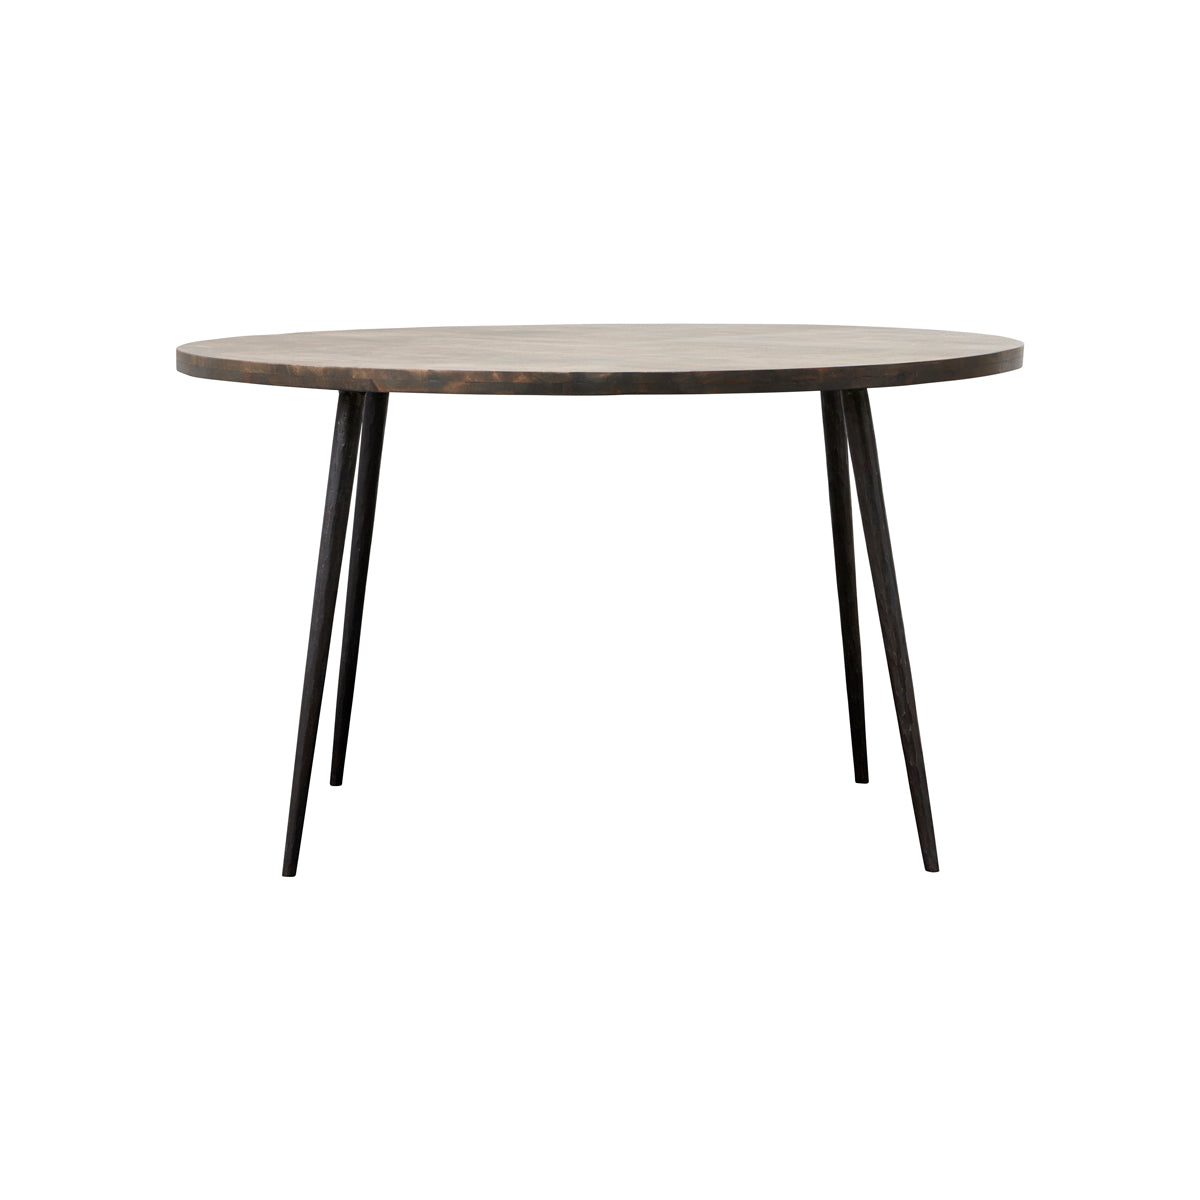 Dining table Club Black Stain 130cm